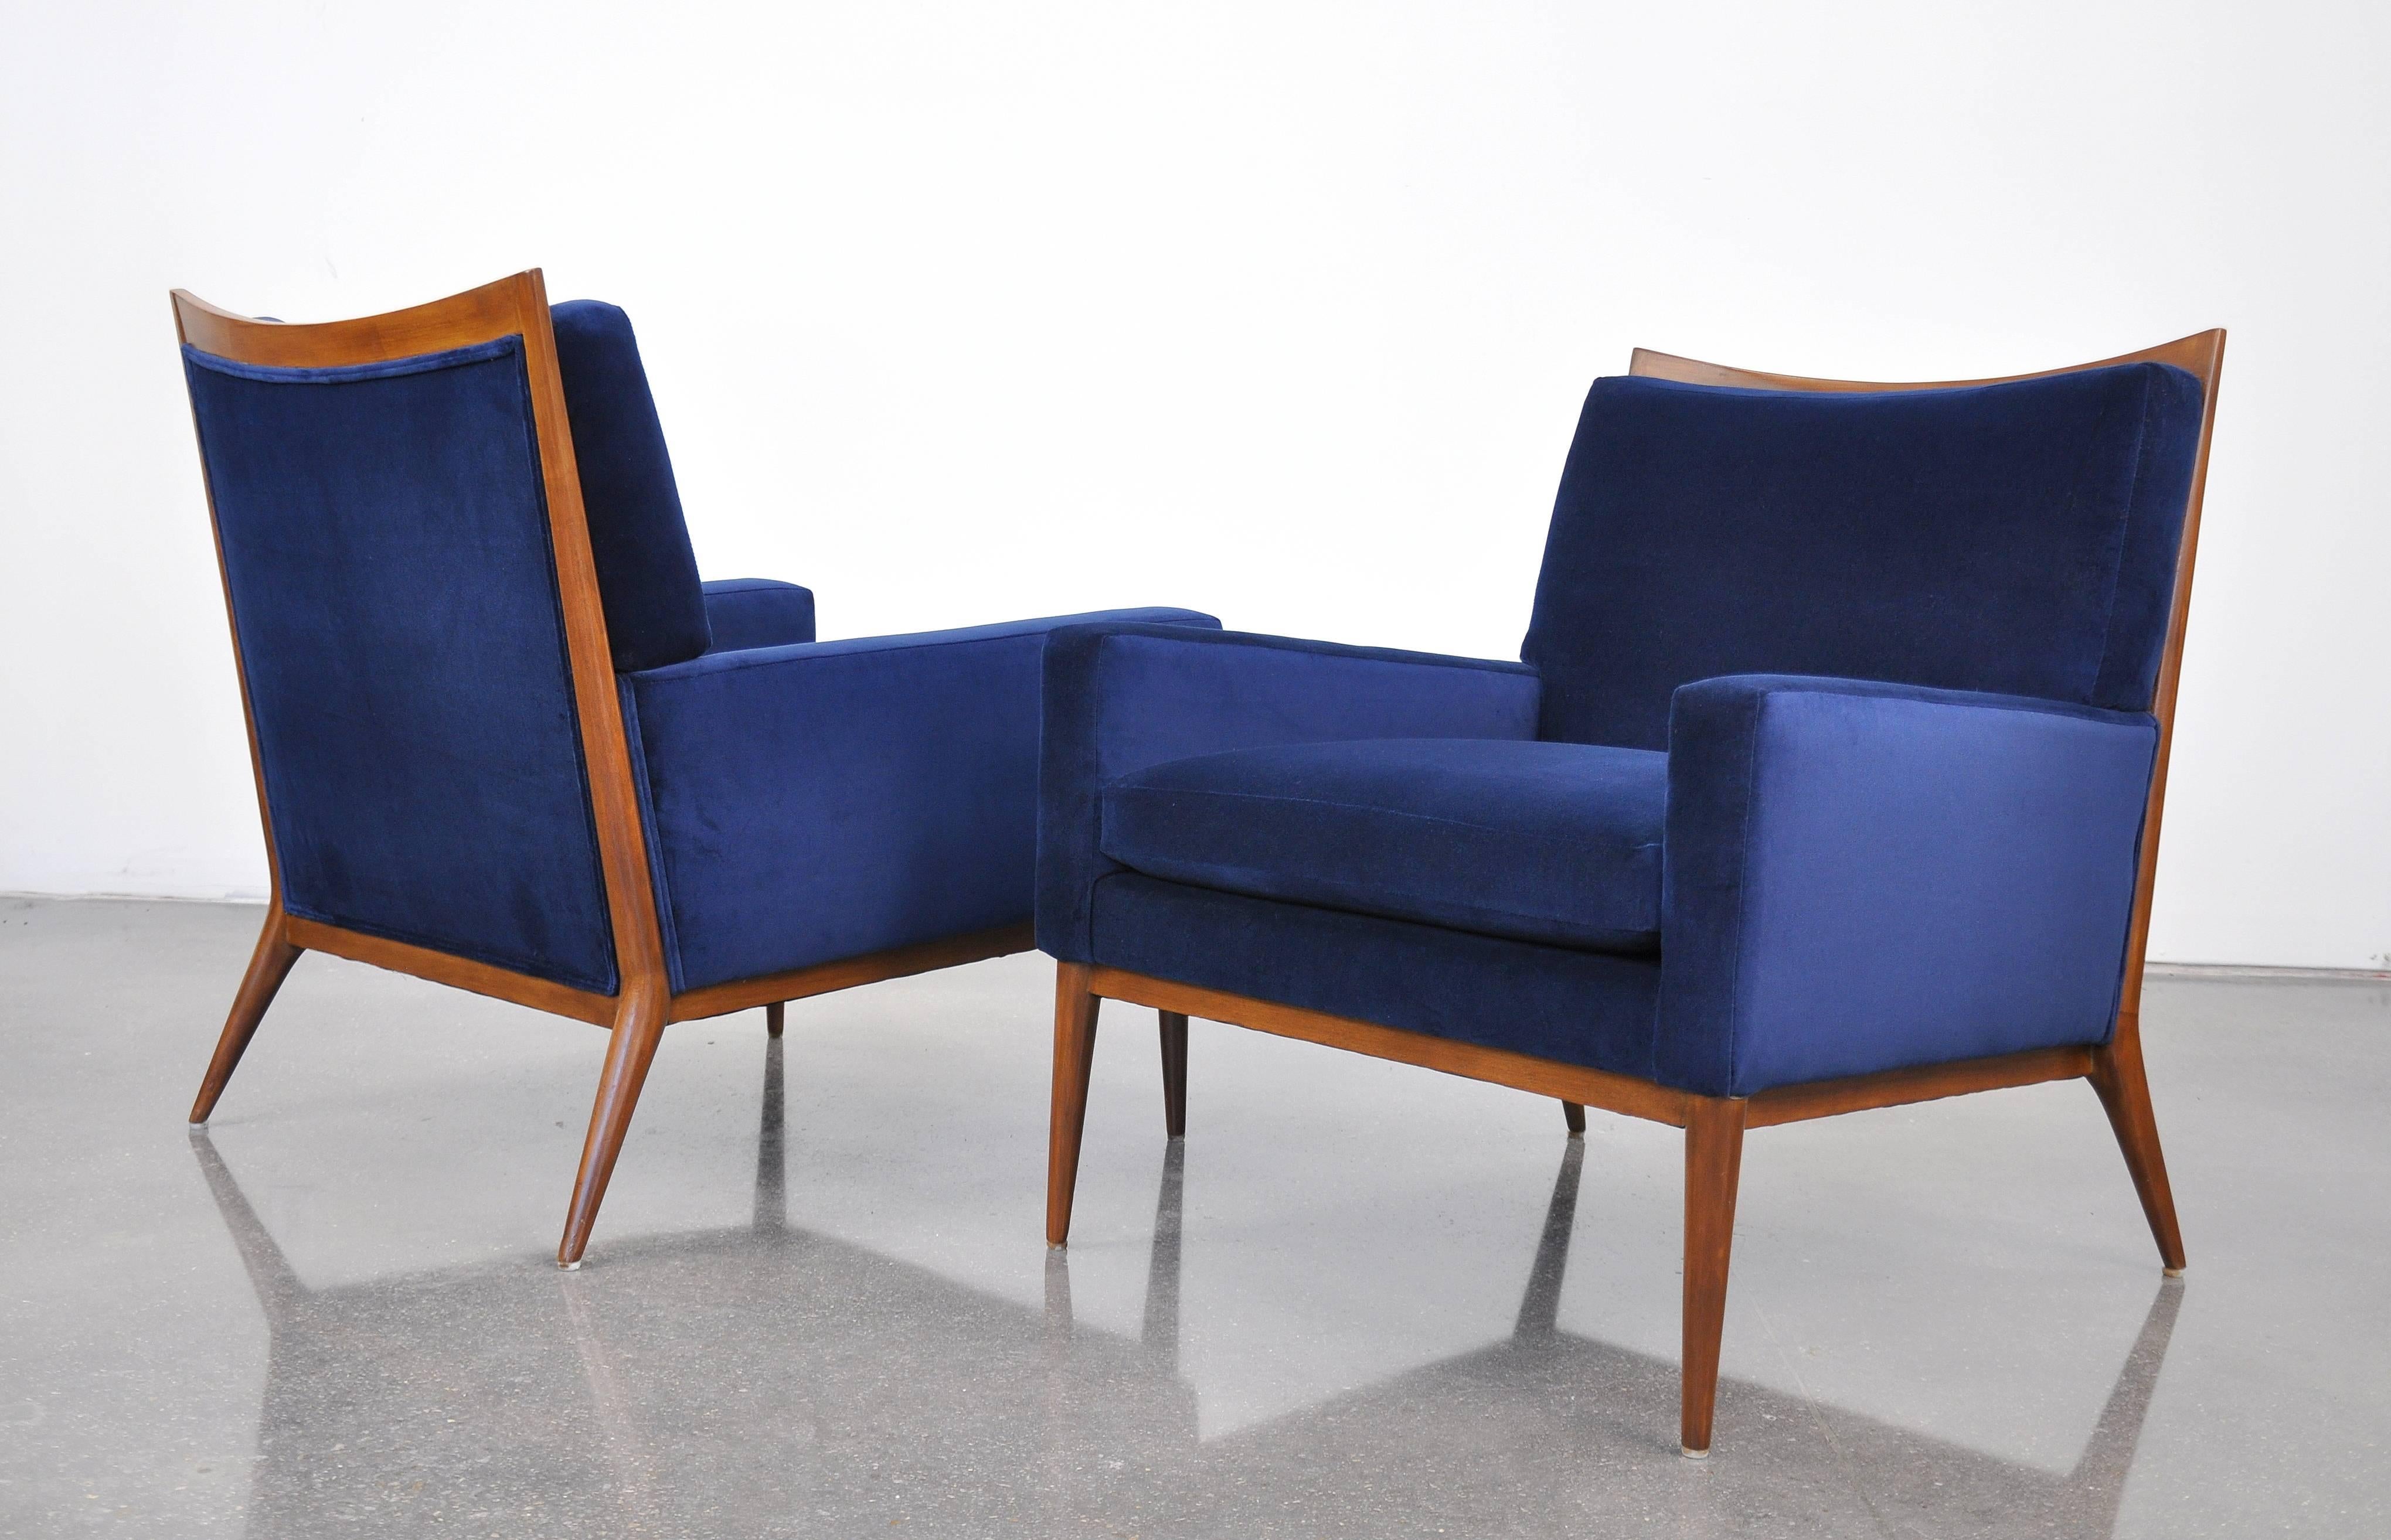 Exquisite pair of Mid-Century Modern model 1322 armchairs from the coveted Directional collection, dating from the 1950s. The refinished chairs have been recovered in a stunning deep and mesmerizing sapphire blue 100% cotton velvet. The beautifully